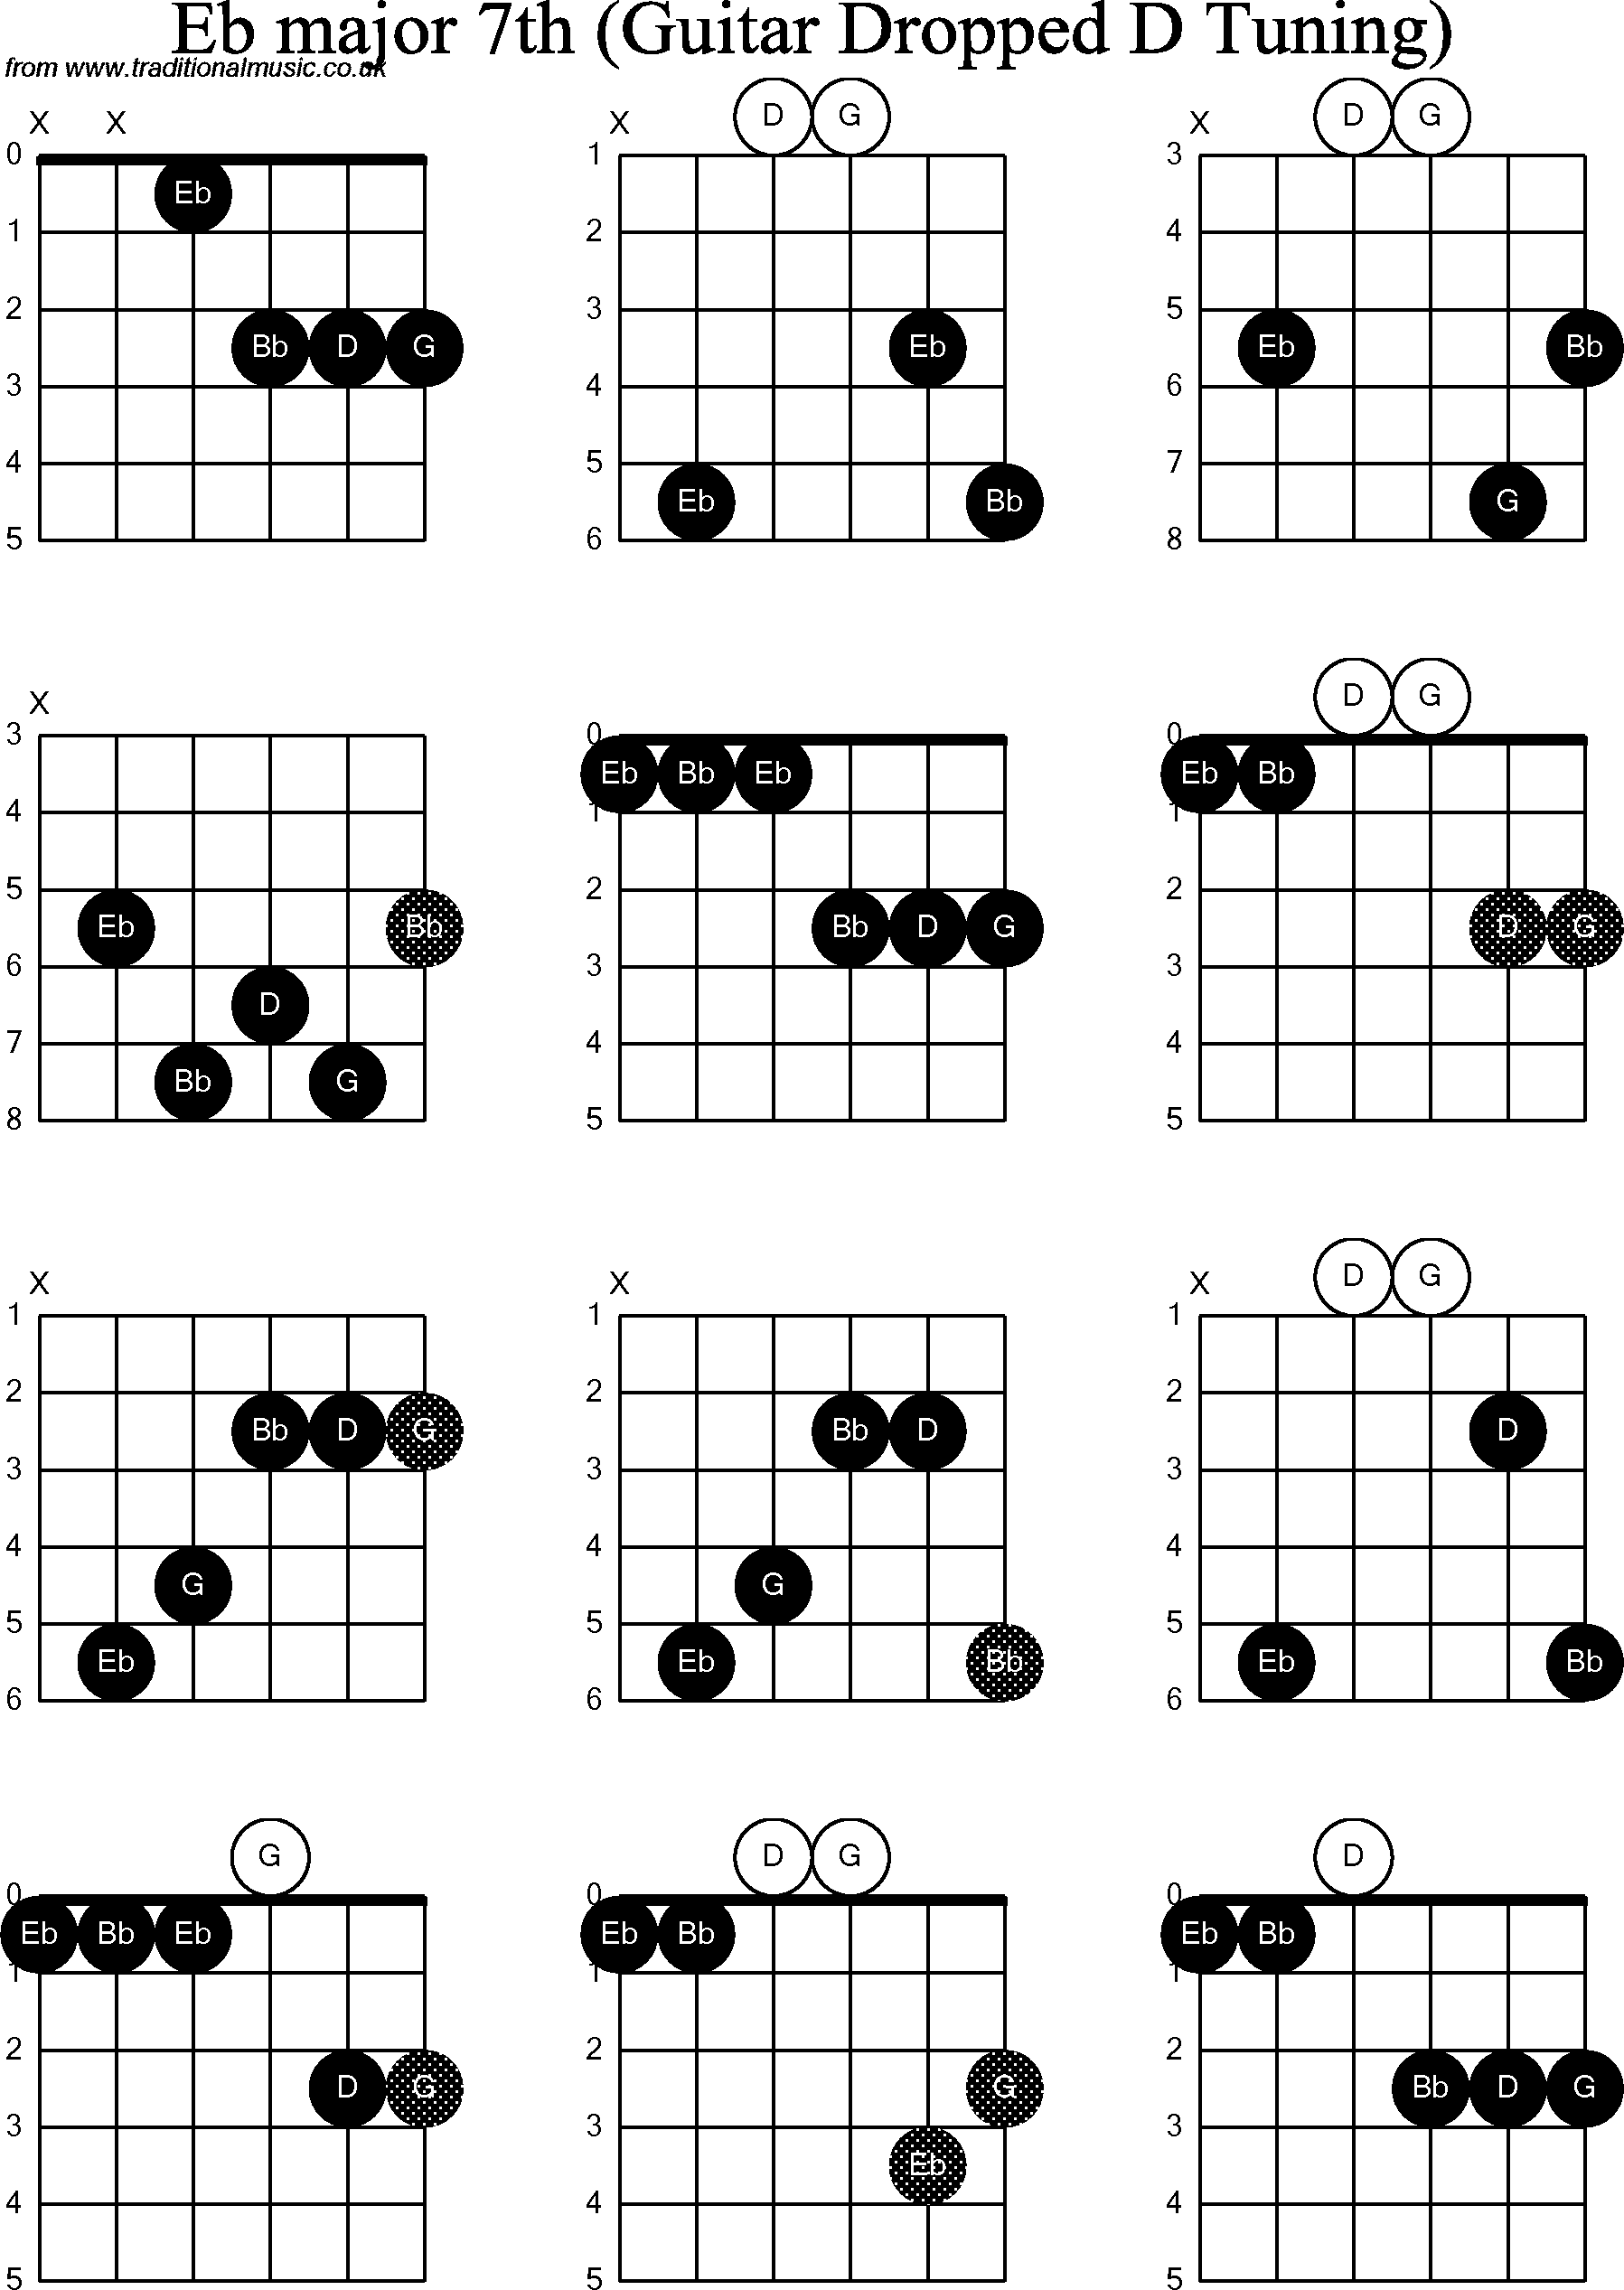 Chord diagrams for dropped D Guitar(DADGBE), Eb Major7th